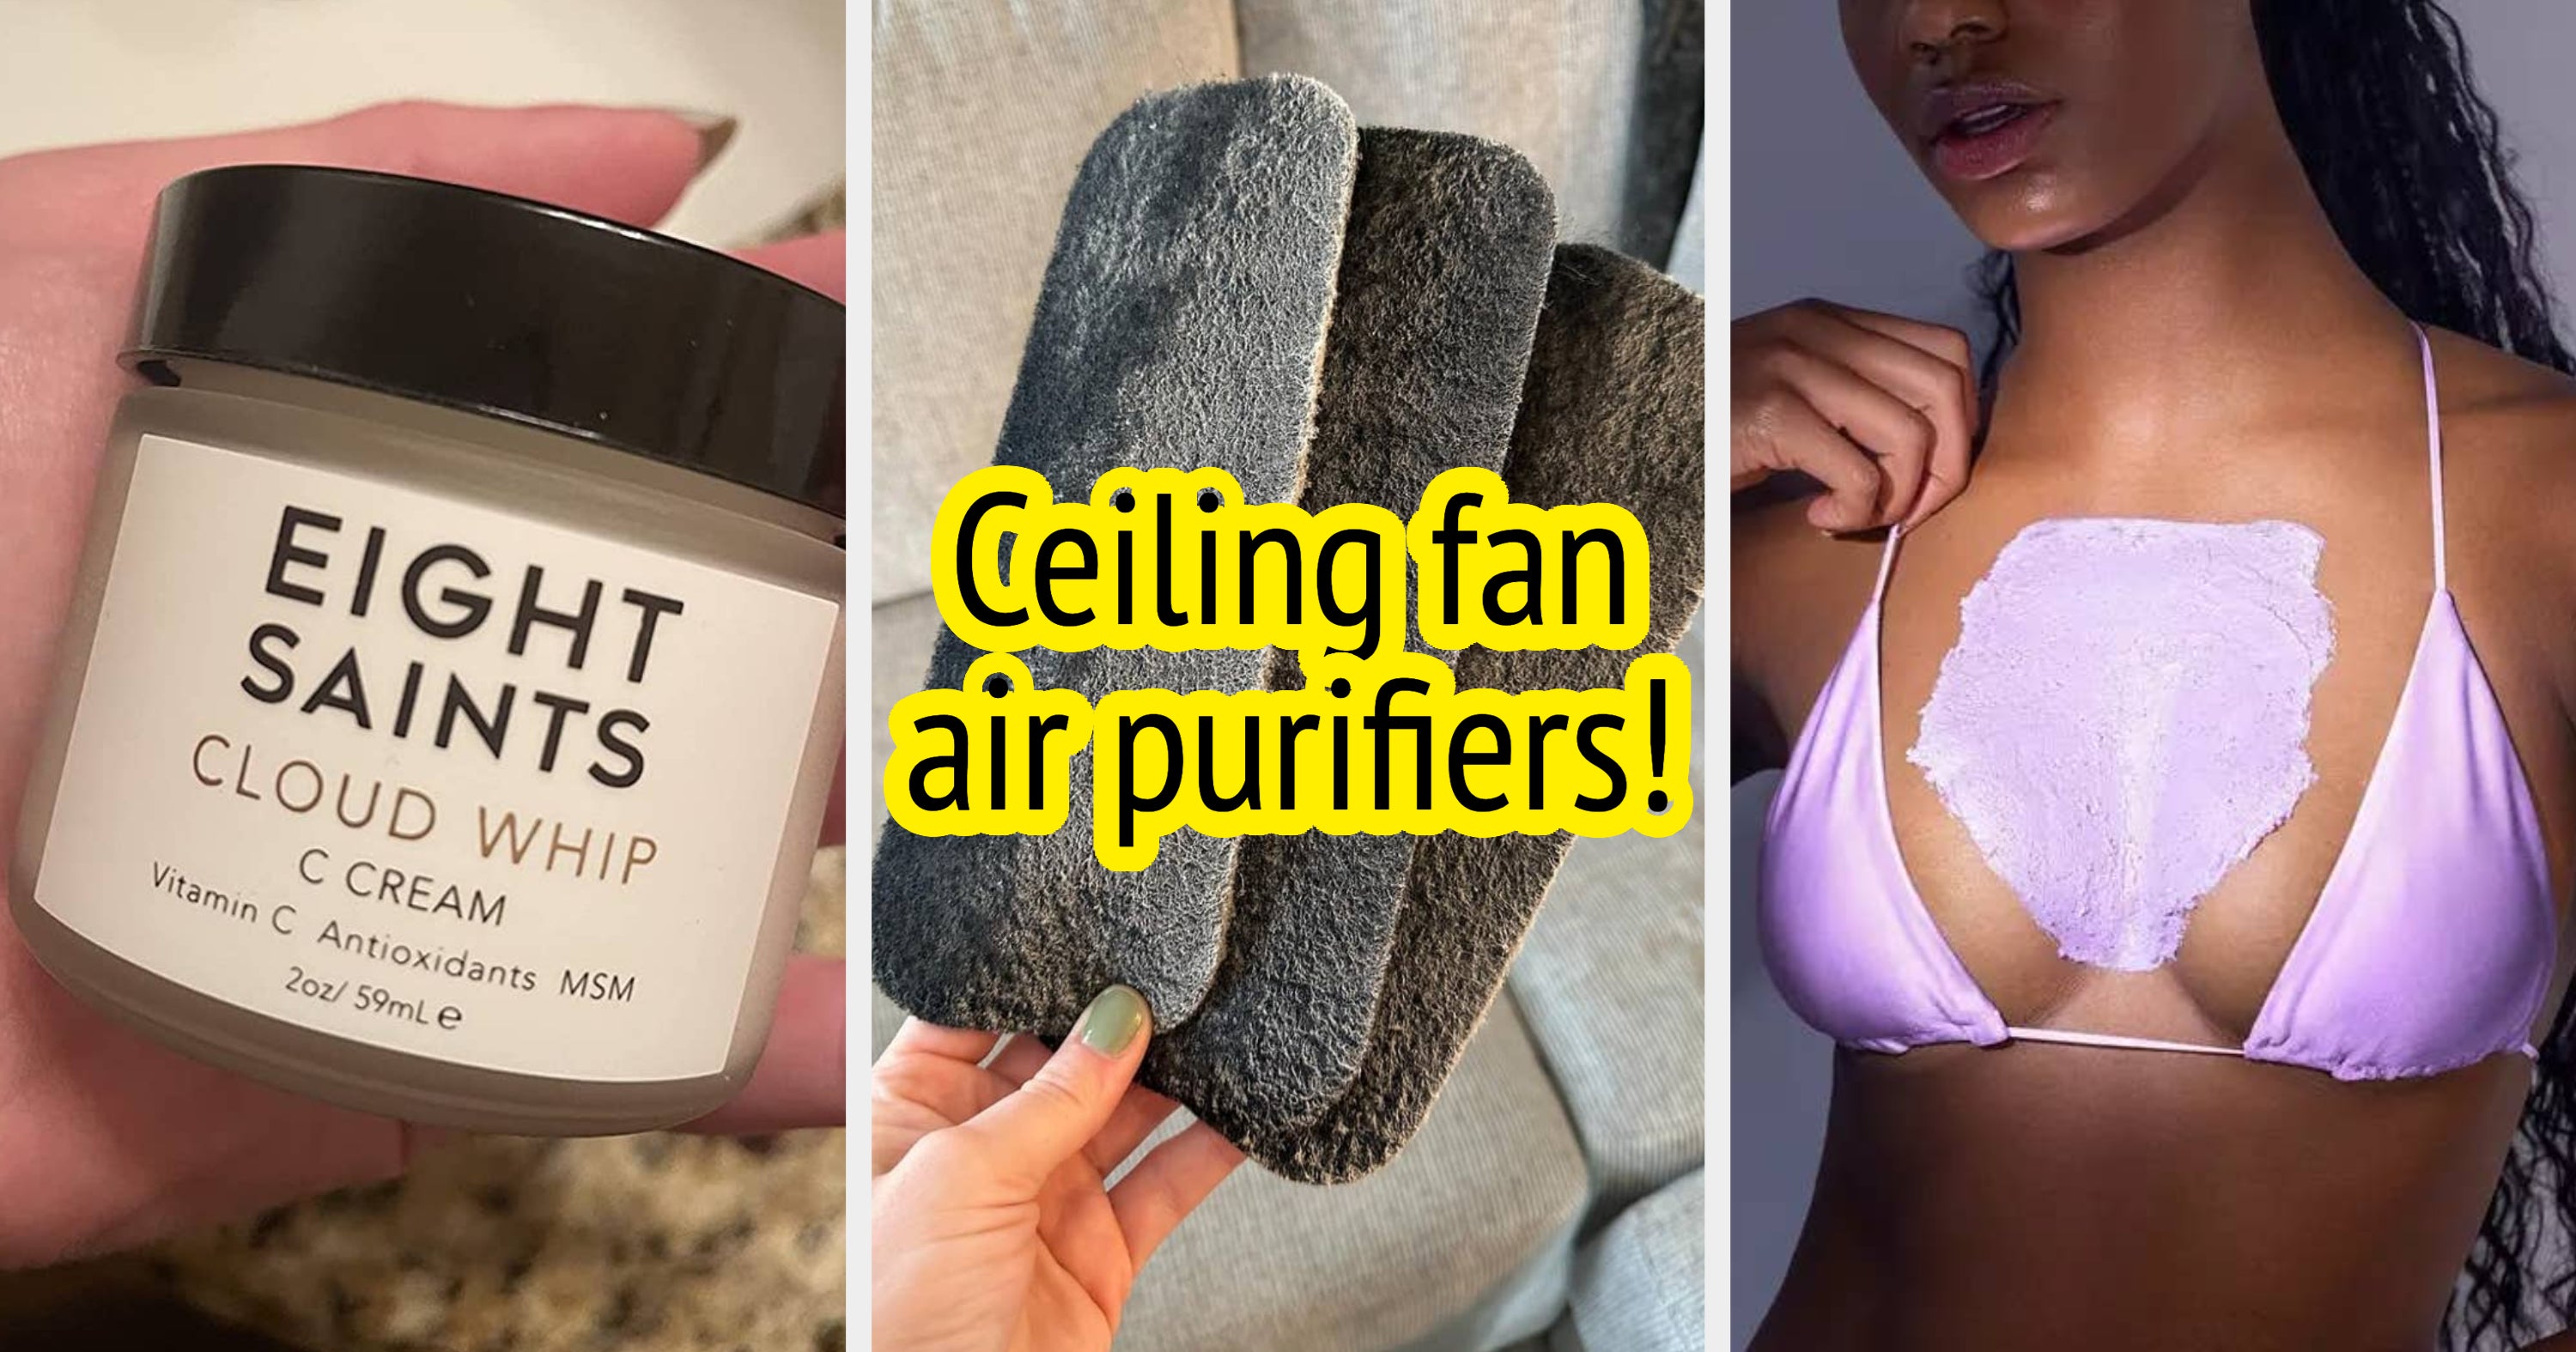 34 products you just have to love